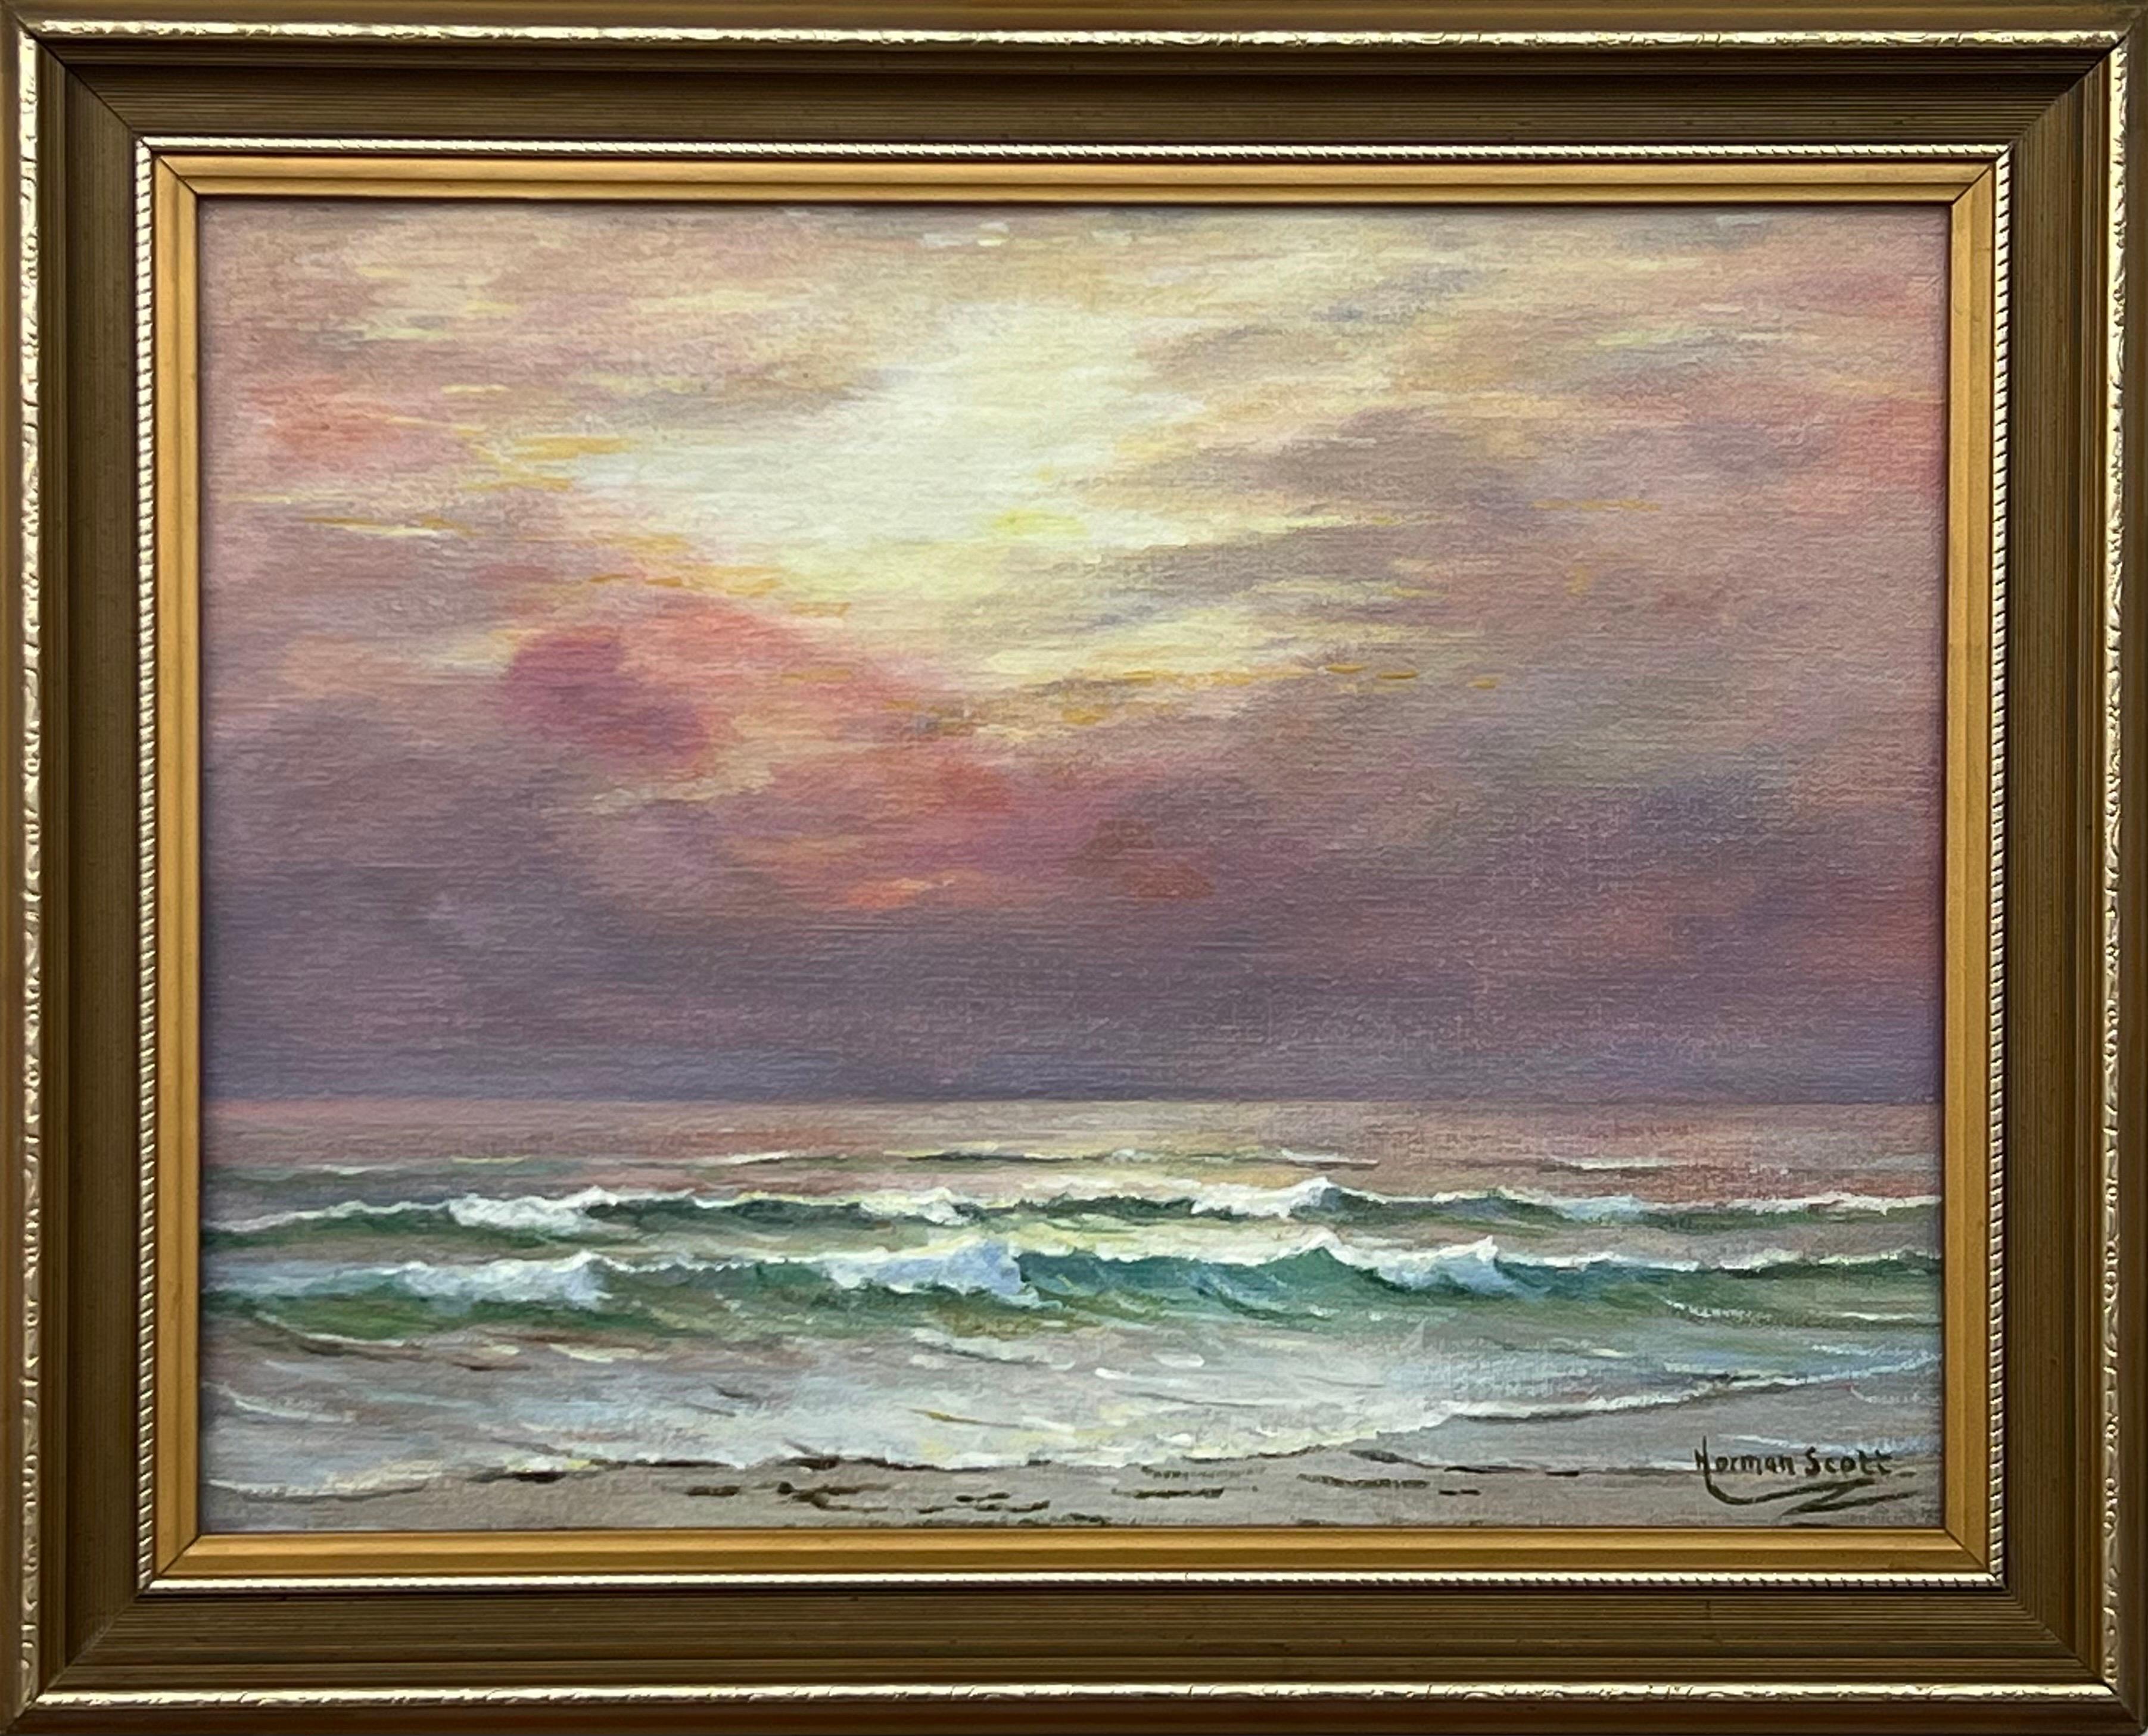 Norman Scott Landscape Painting - Dawn Seascape Painting with Pink Sky and Waves by 20th Century British Artist